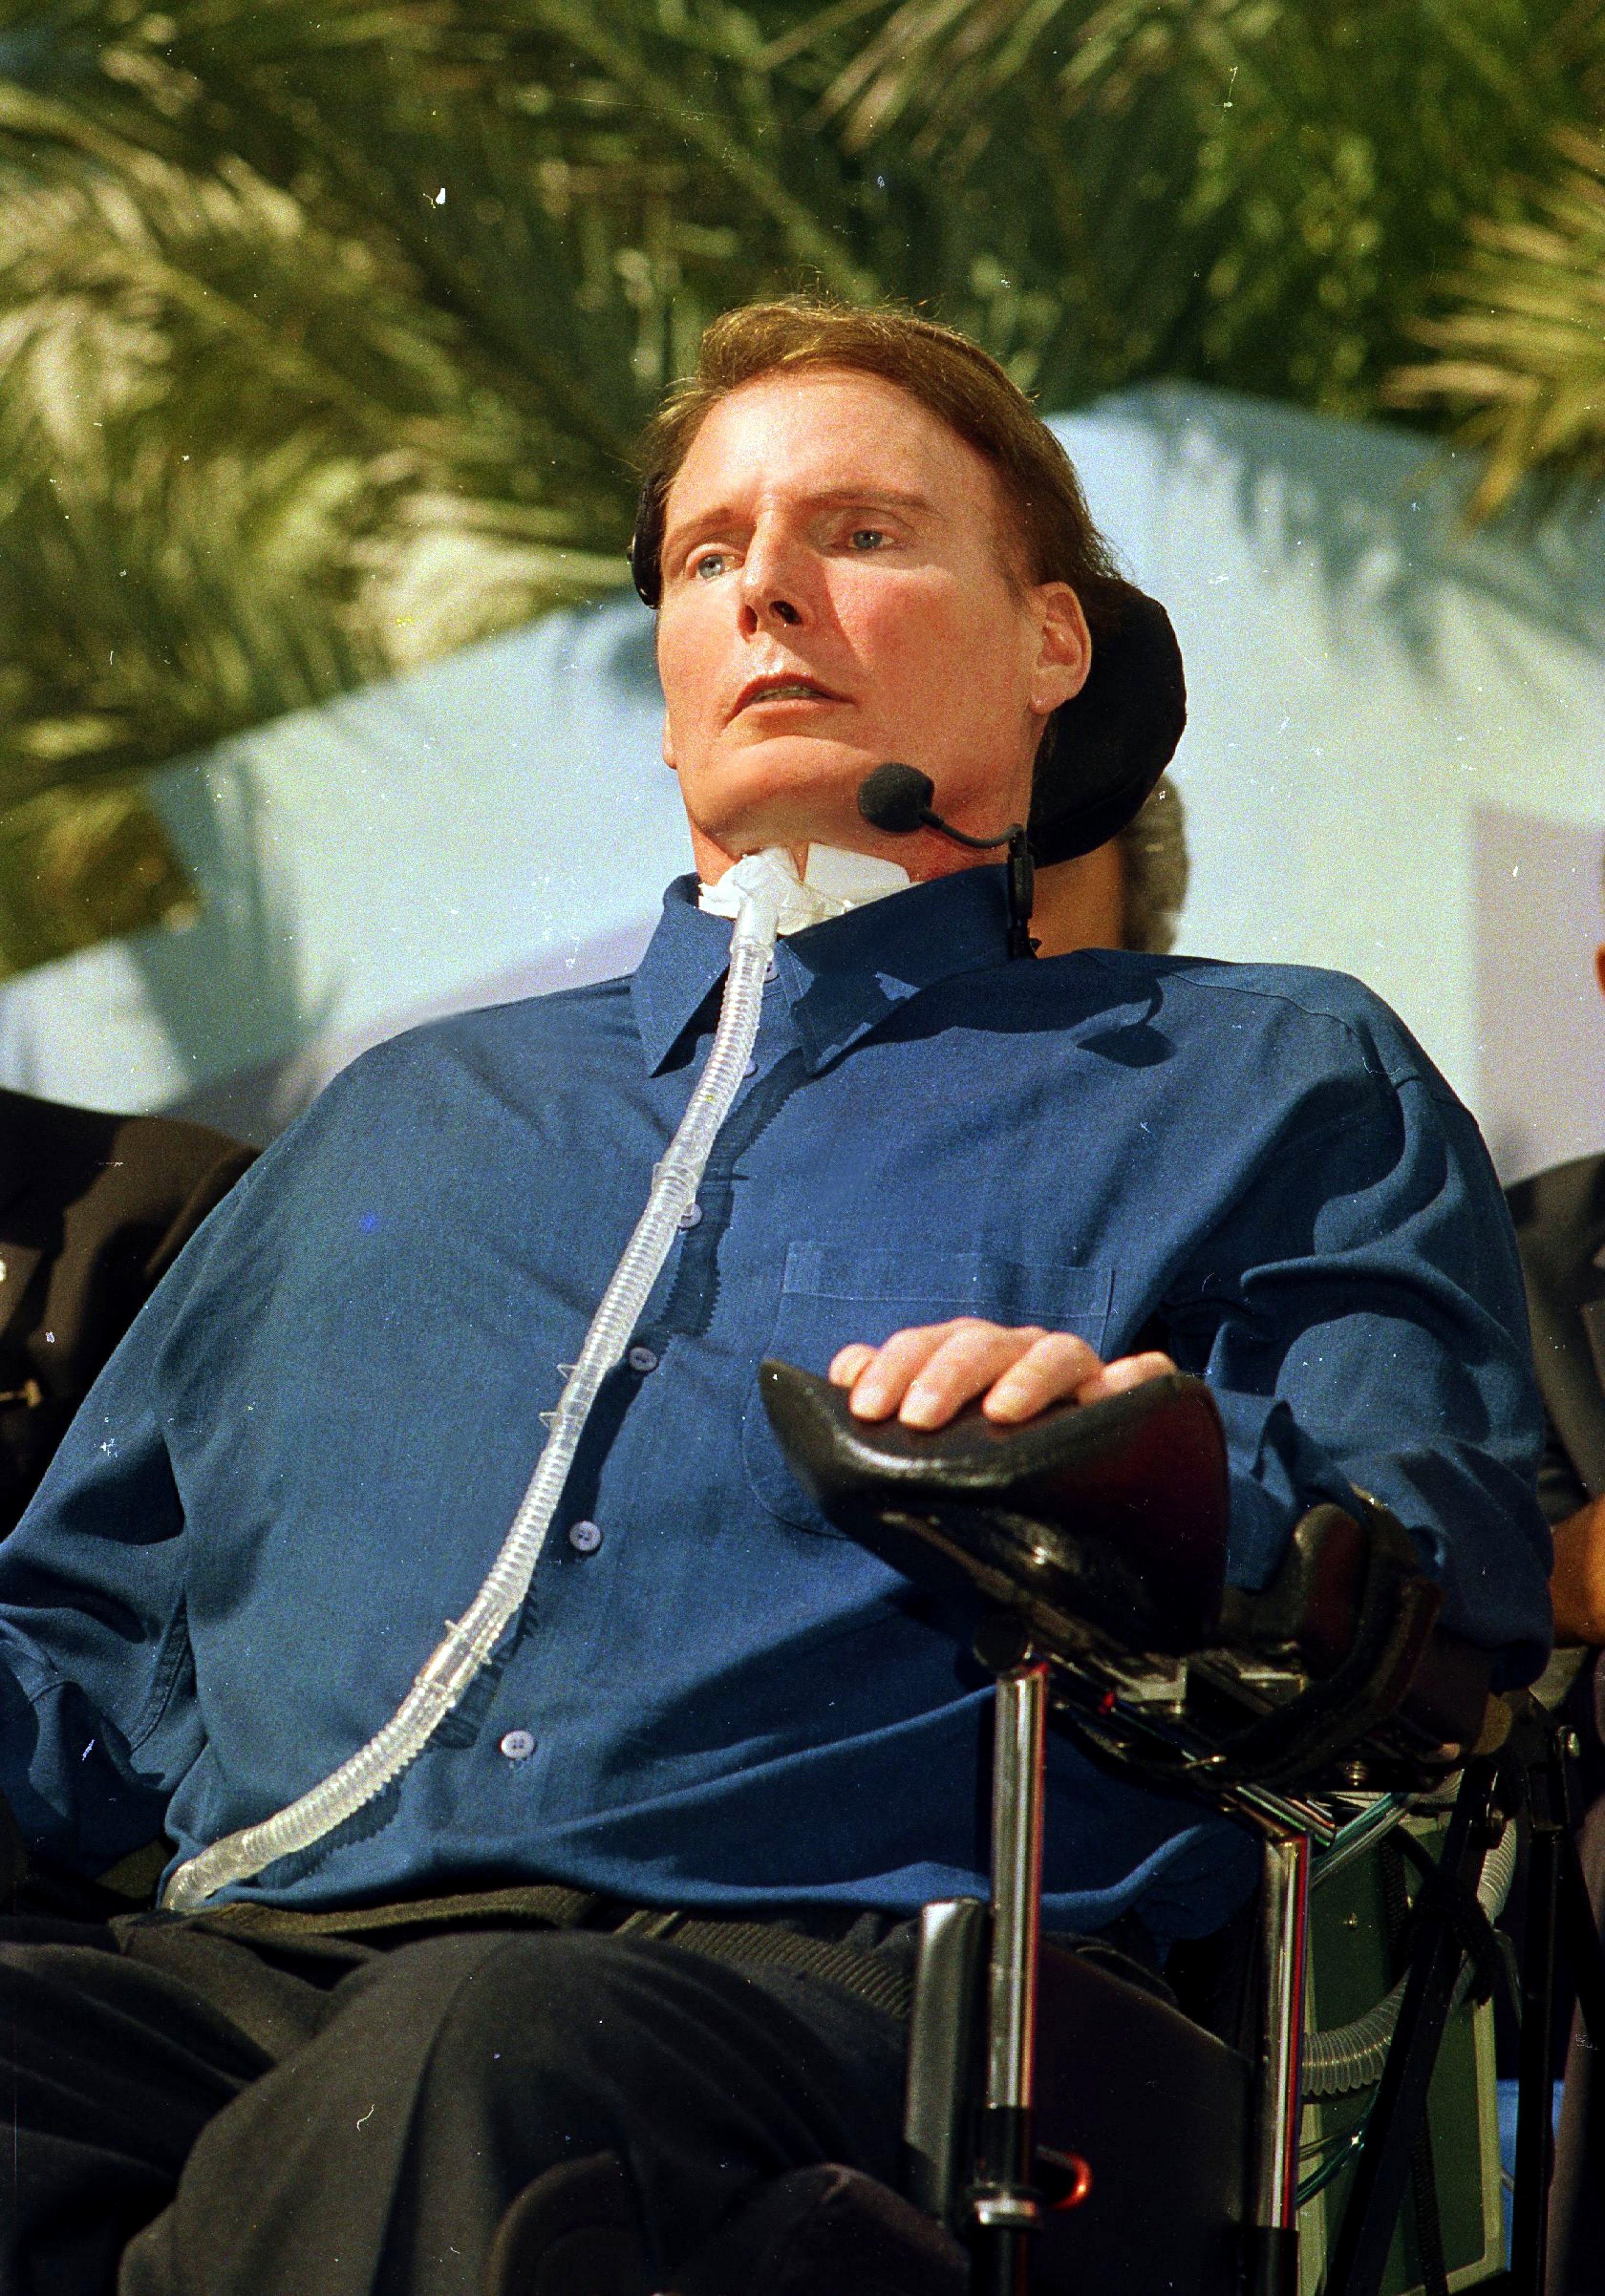 Christopher Reeve in Miami Florida in 2000. | Source: Getty Images